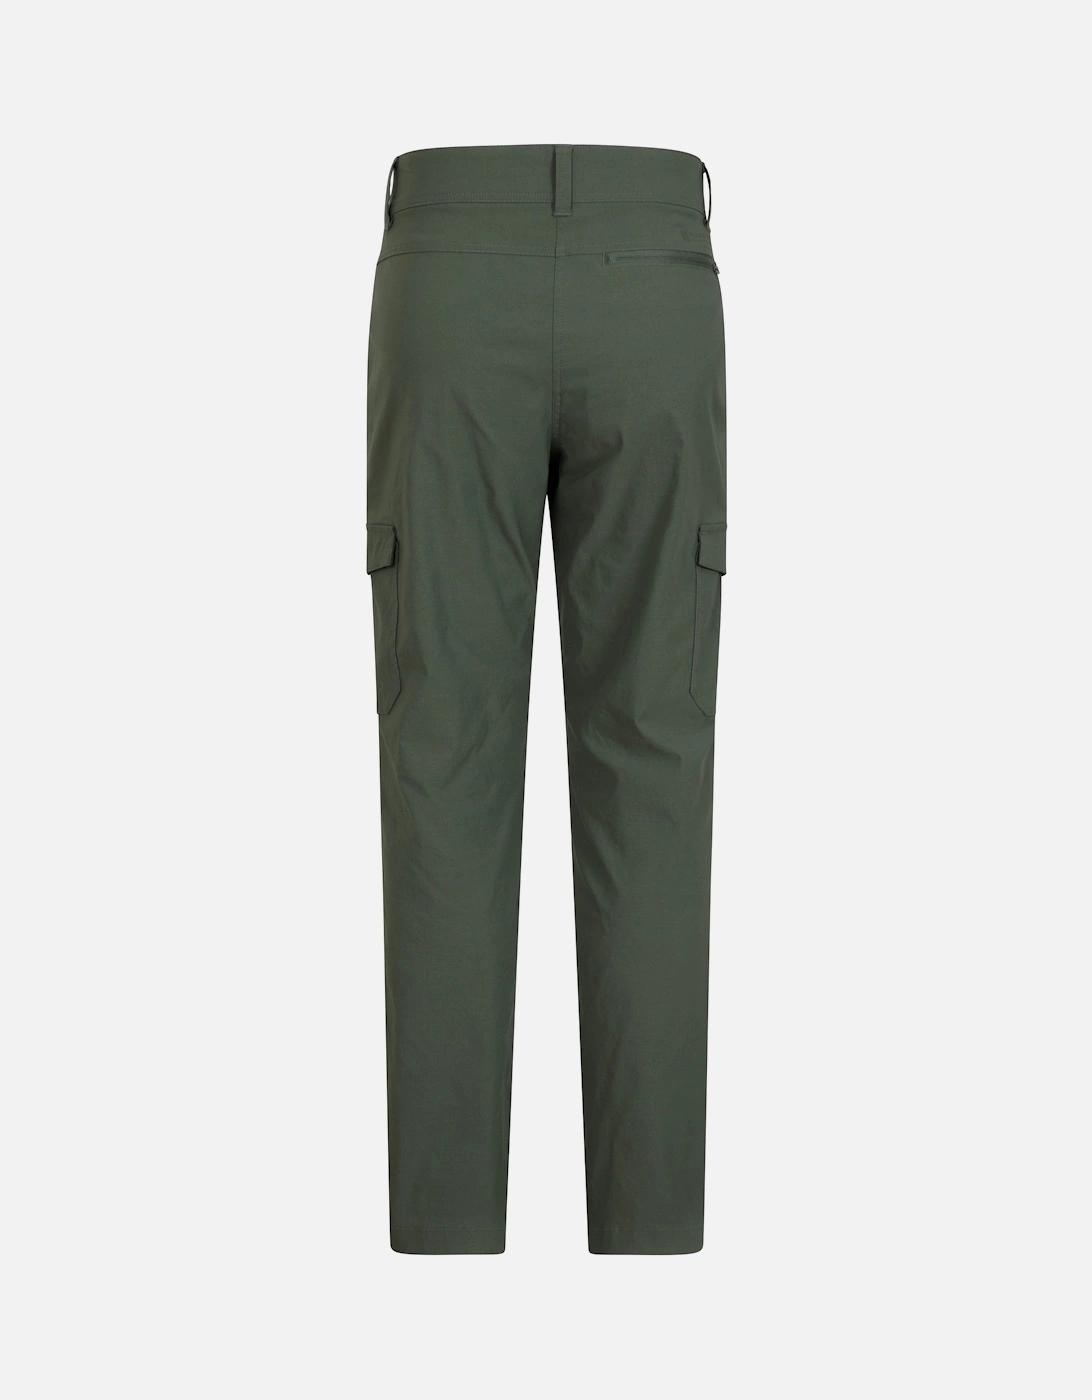 Womens/Ladies Conniston Cargo Trousers